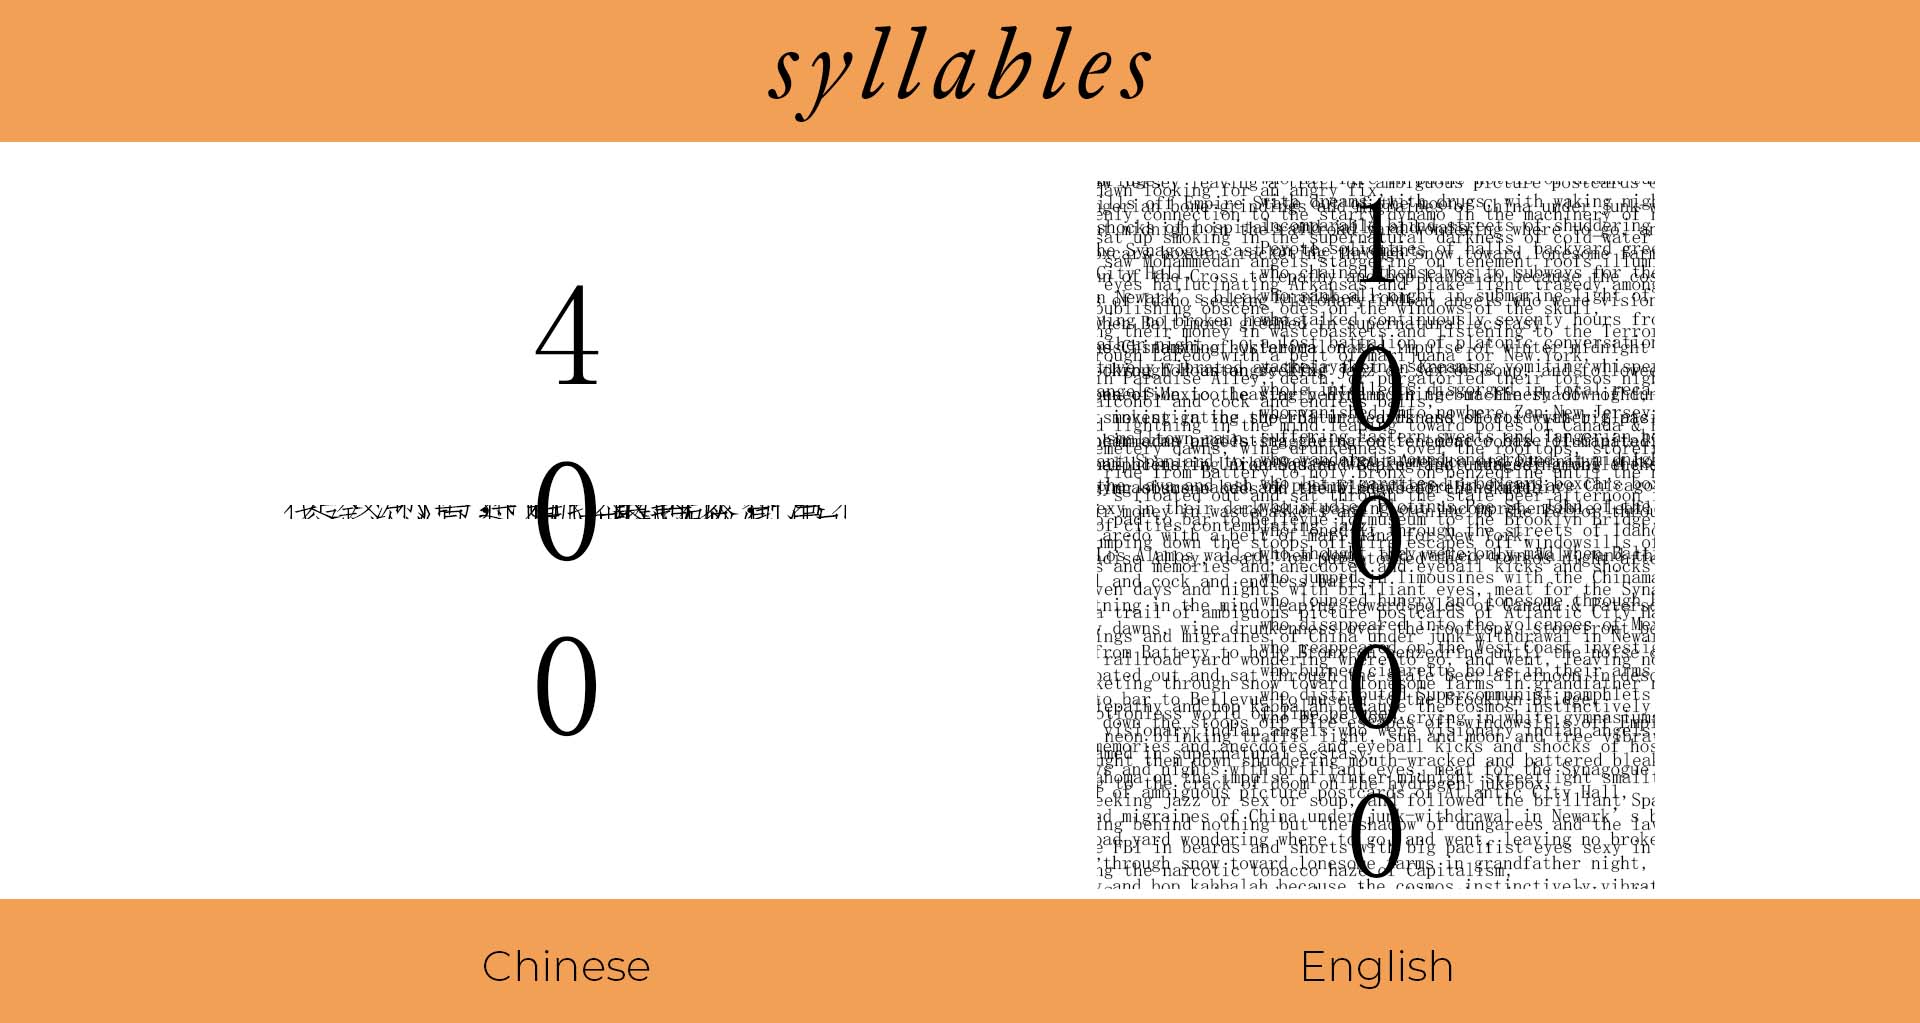 a visual representation of the 400 syllables in Chinese vs the 10000 syllables in English